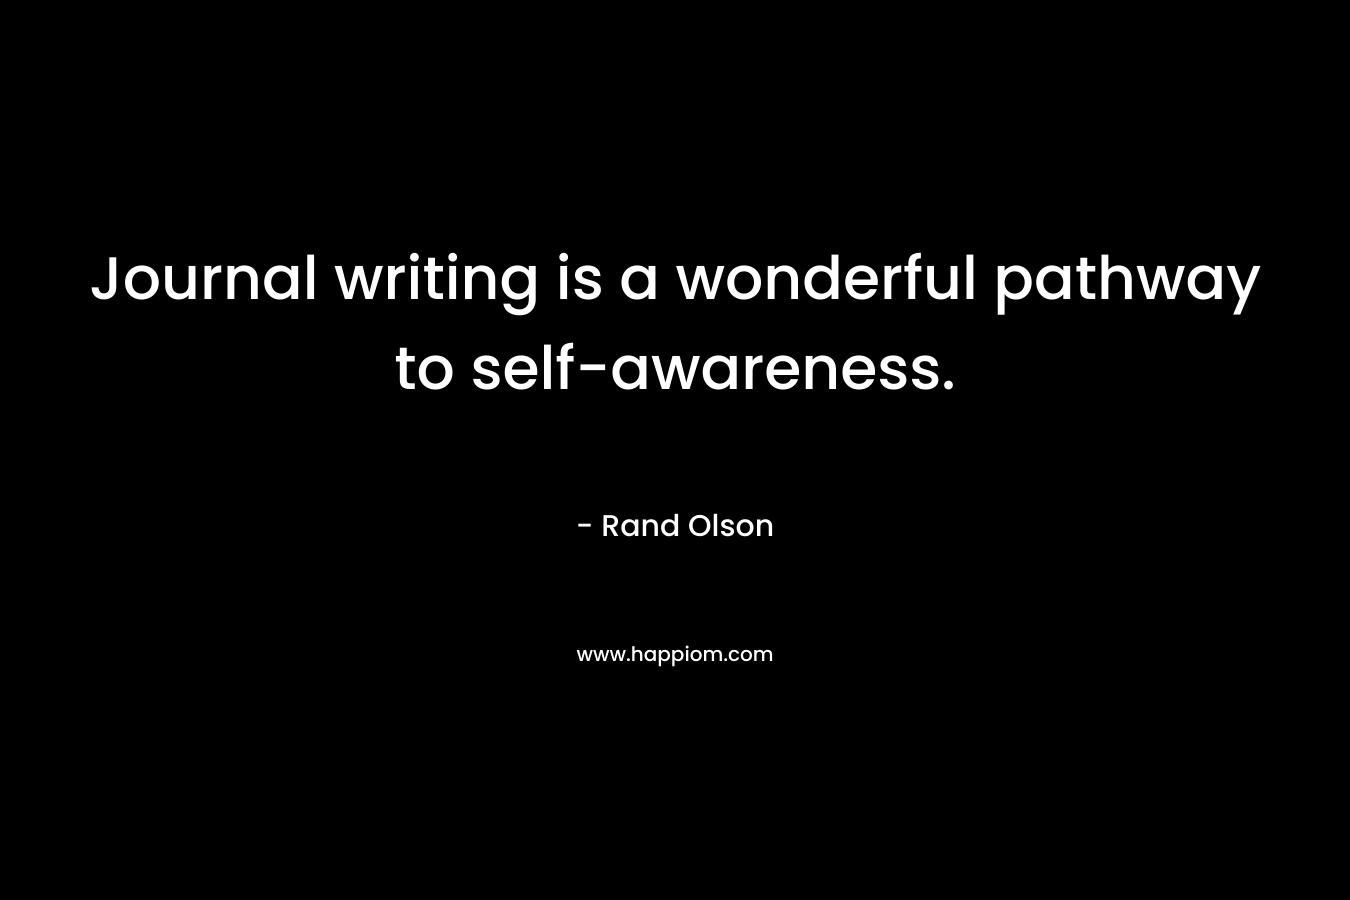 Journal writing is a wonderful pathway to self-awareness. – Rand Olson